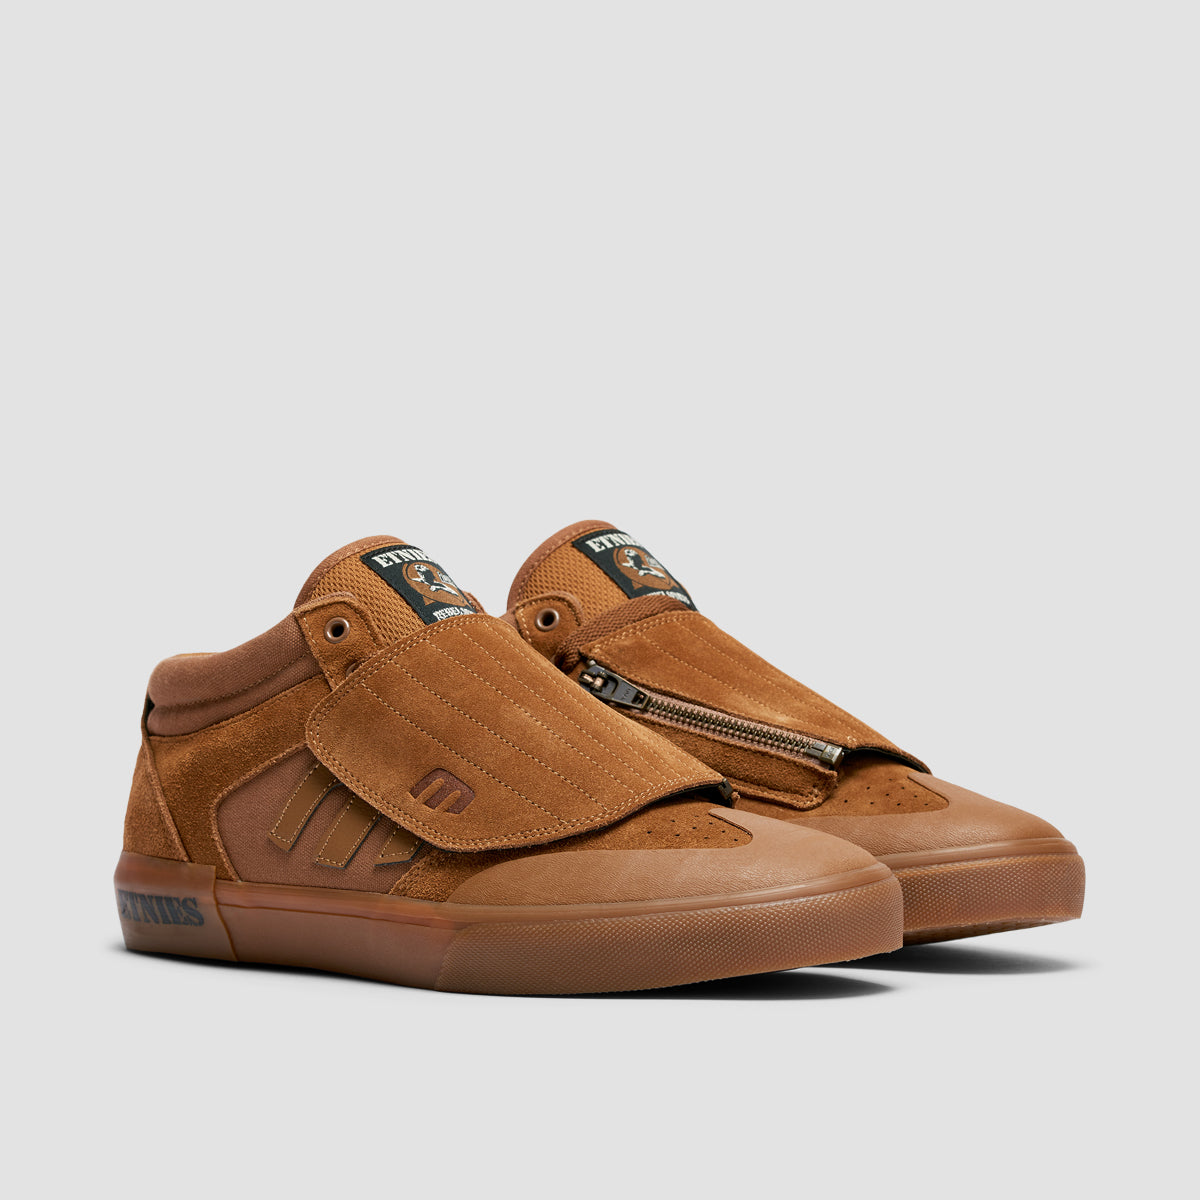 Etnies Windrow Vulc Mid Shoes - Brown/Gum